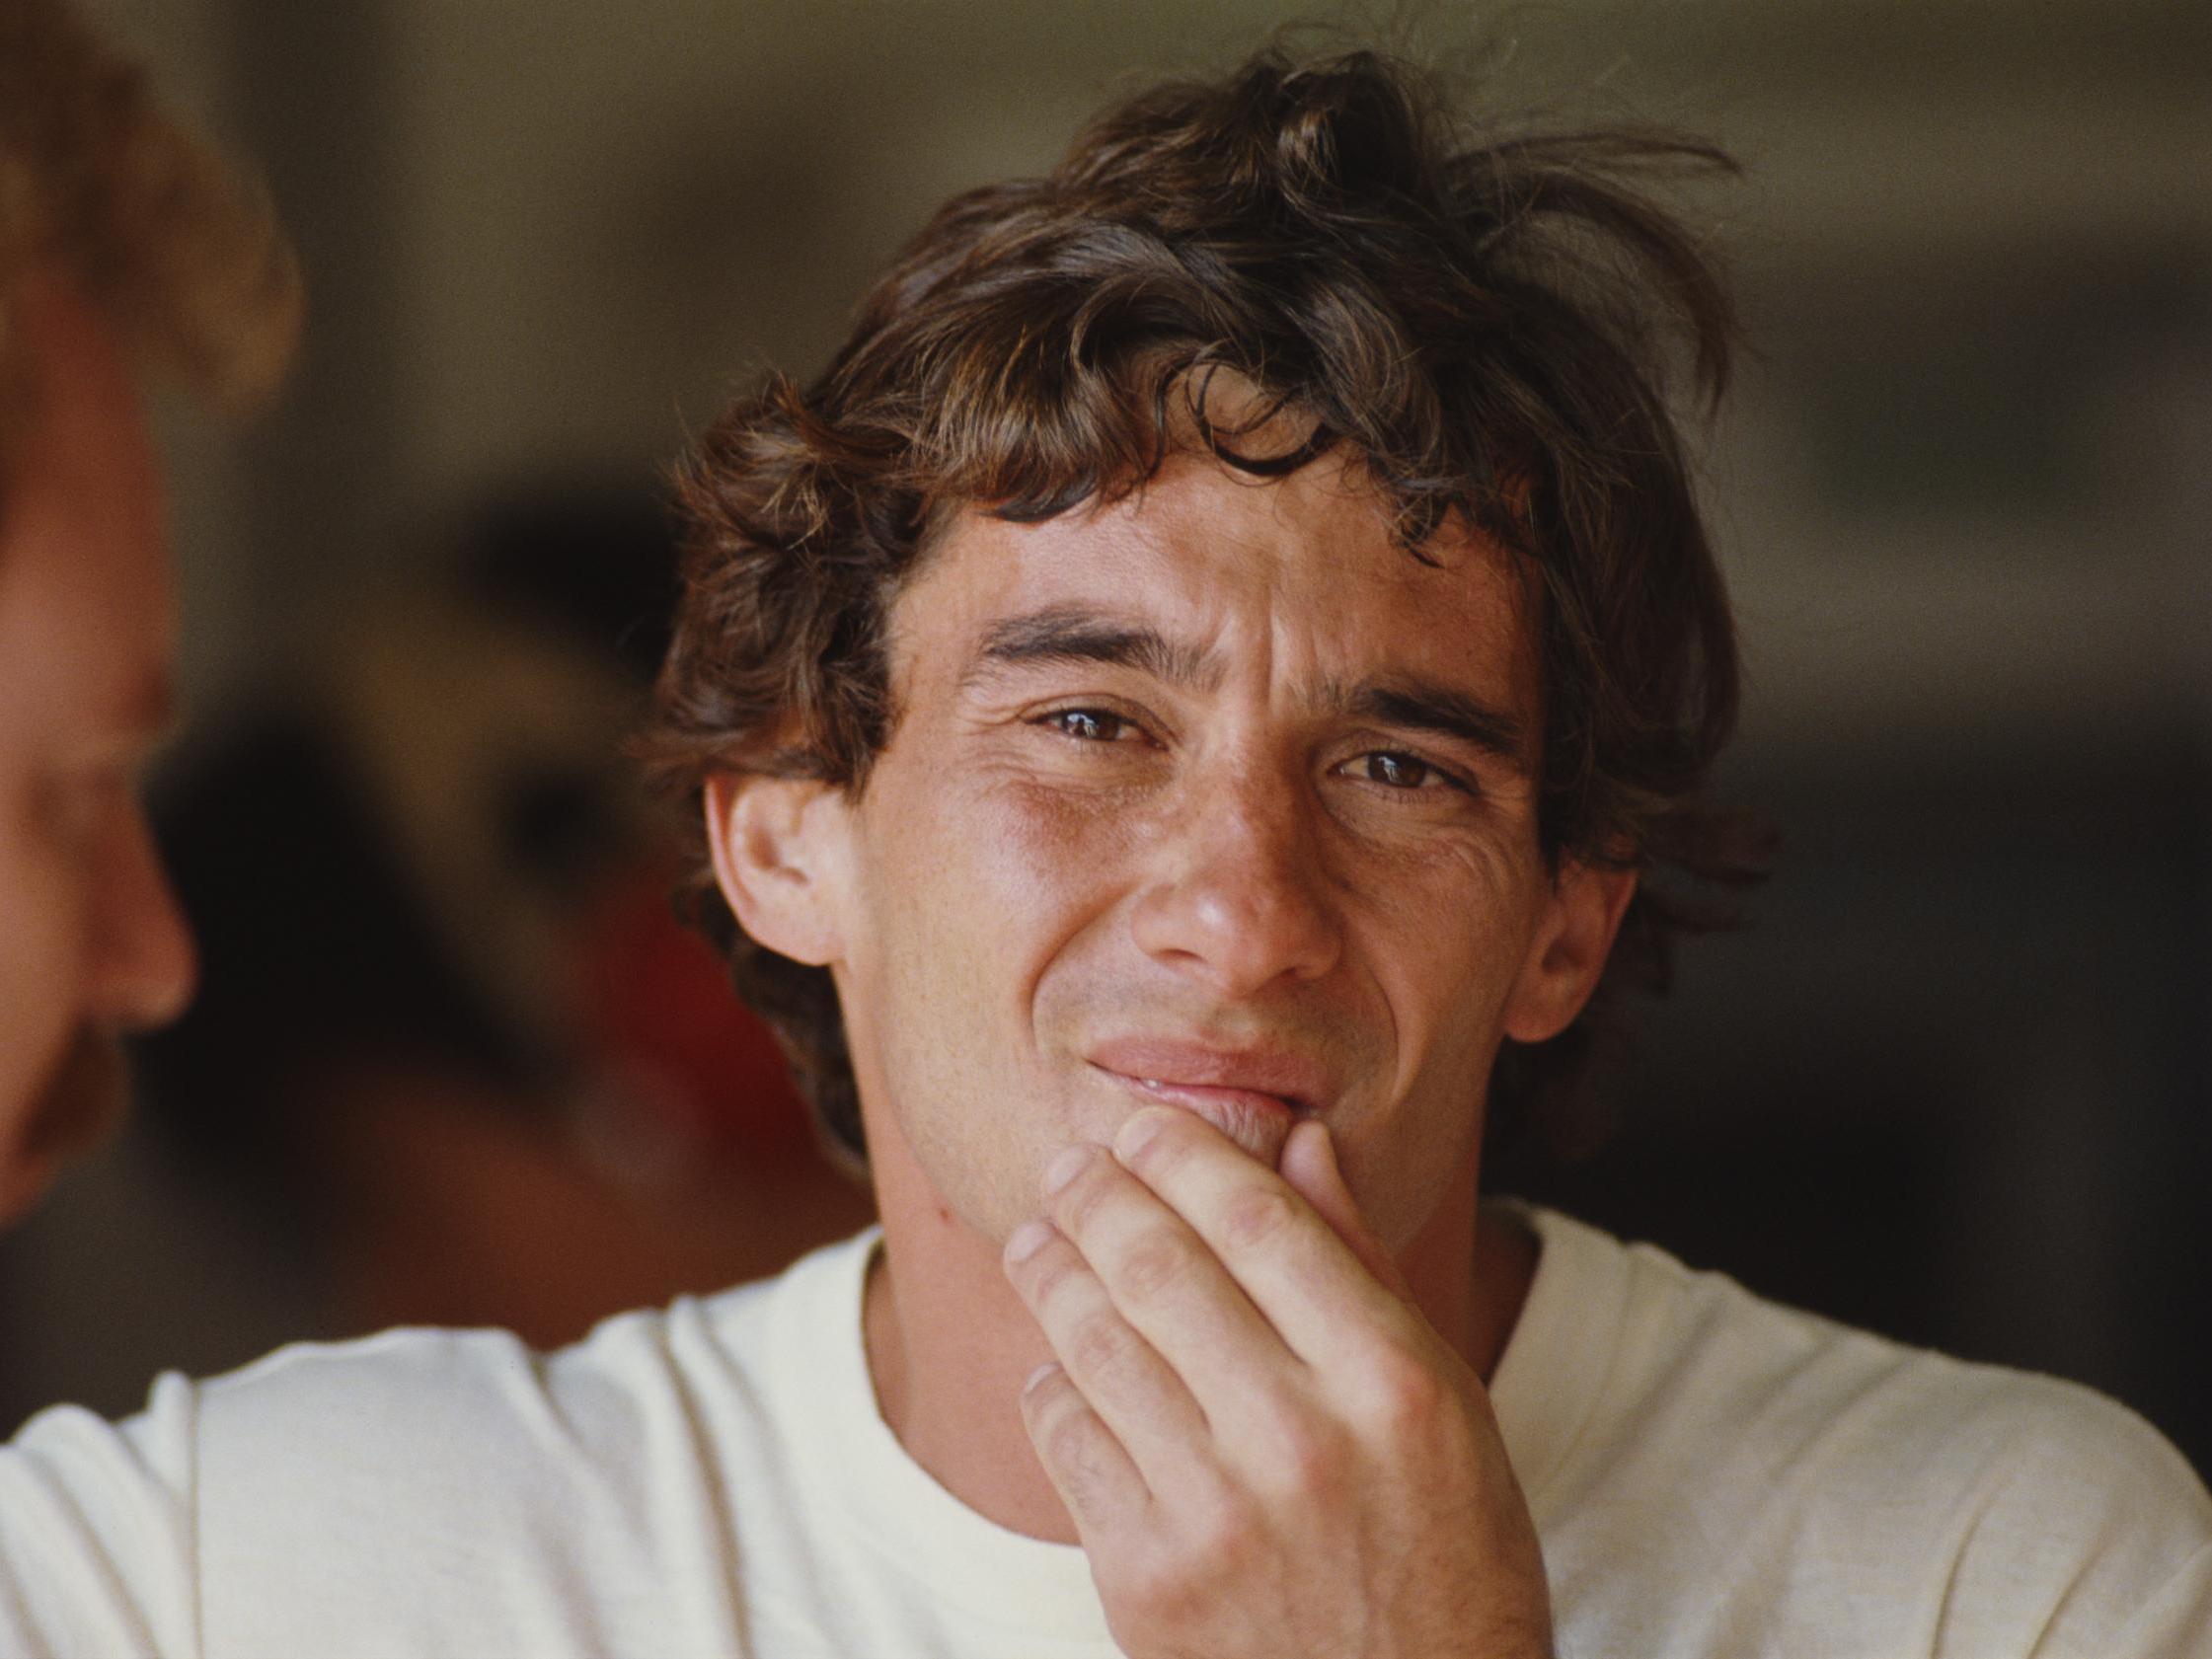 Ayrton Senna Iconic Photo Of F1 Driver Up For Auction…